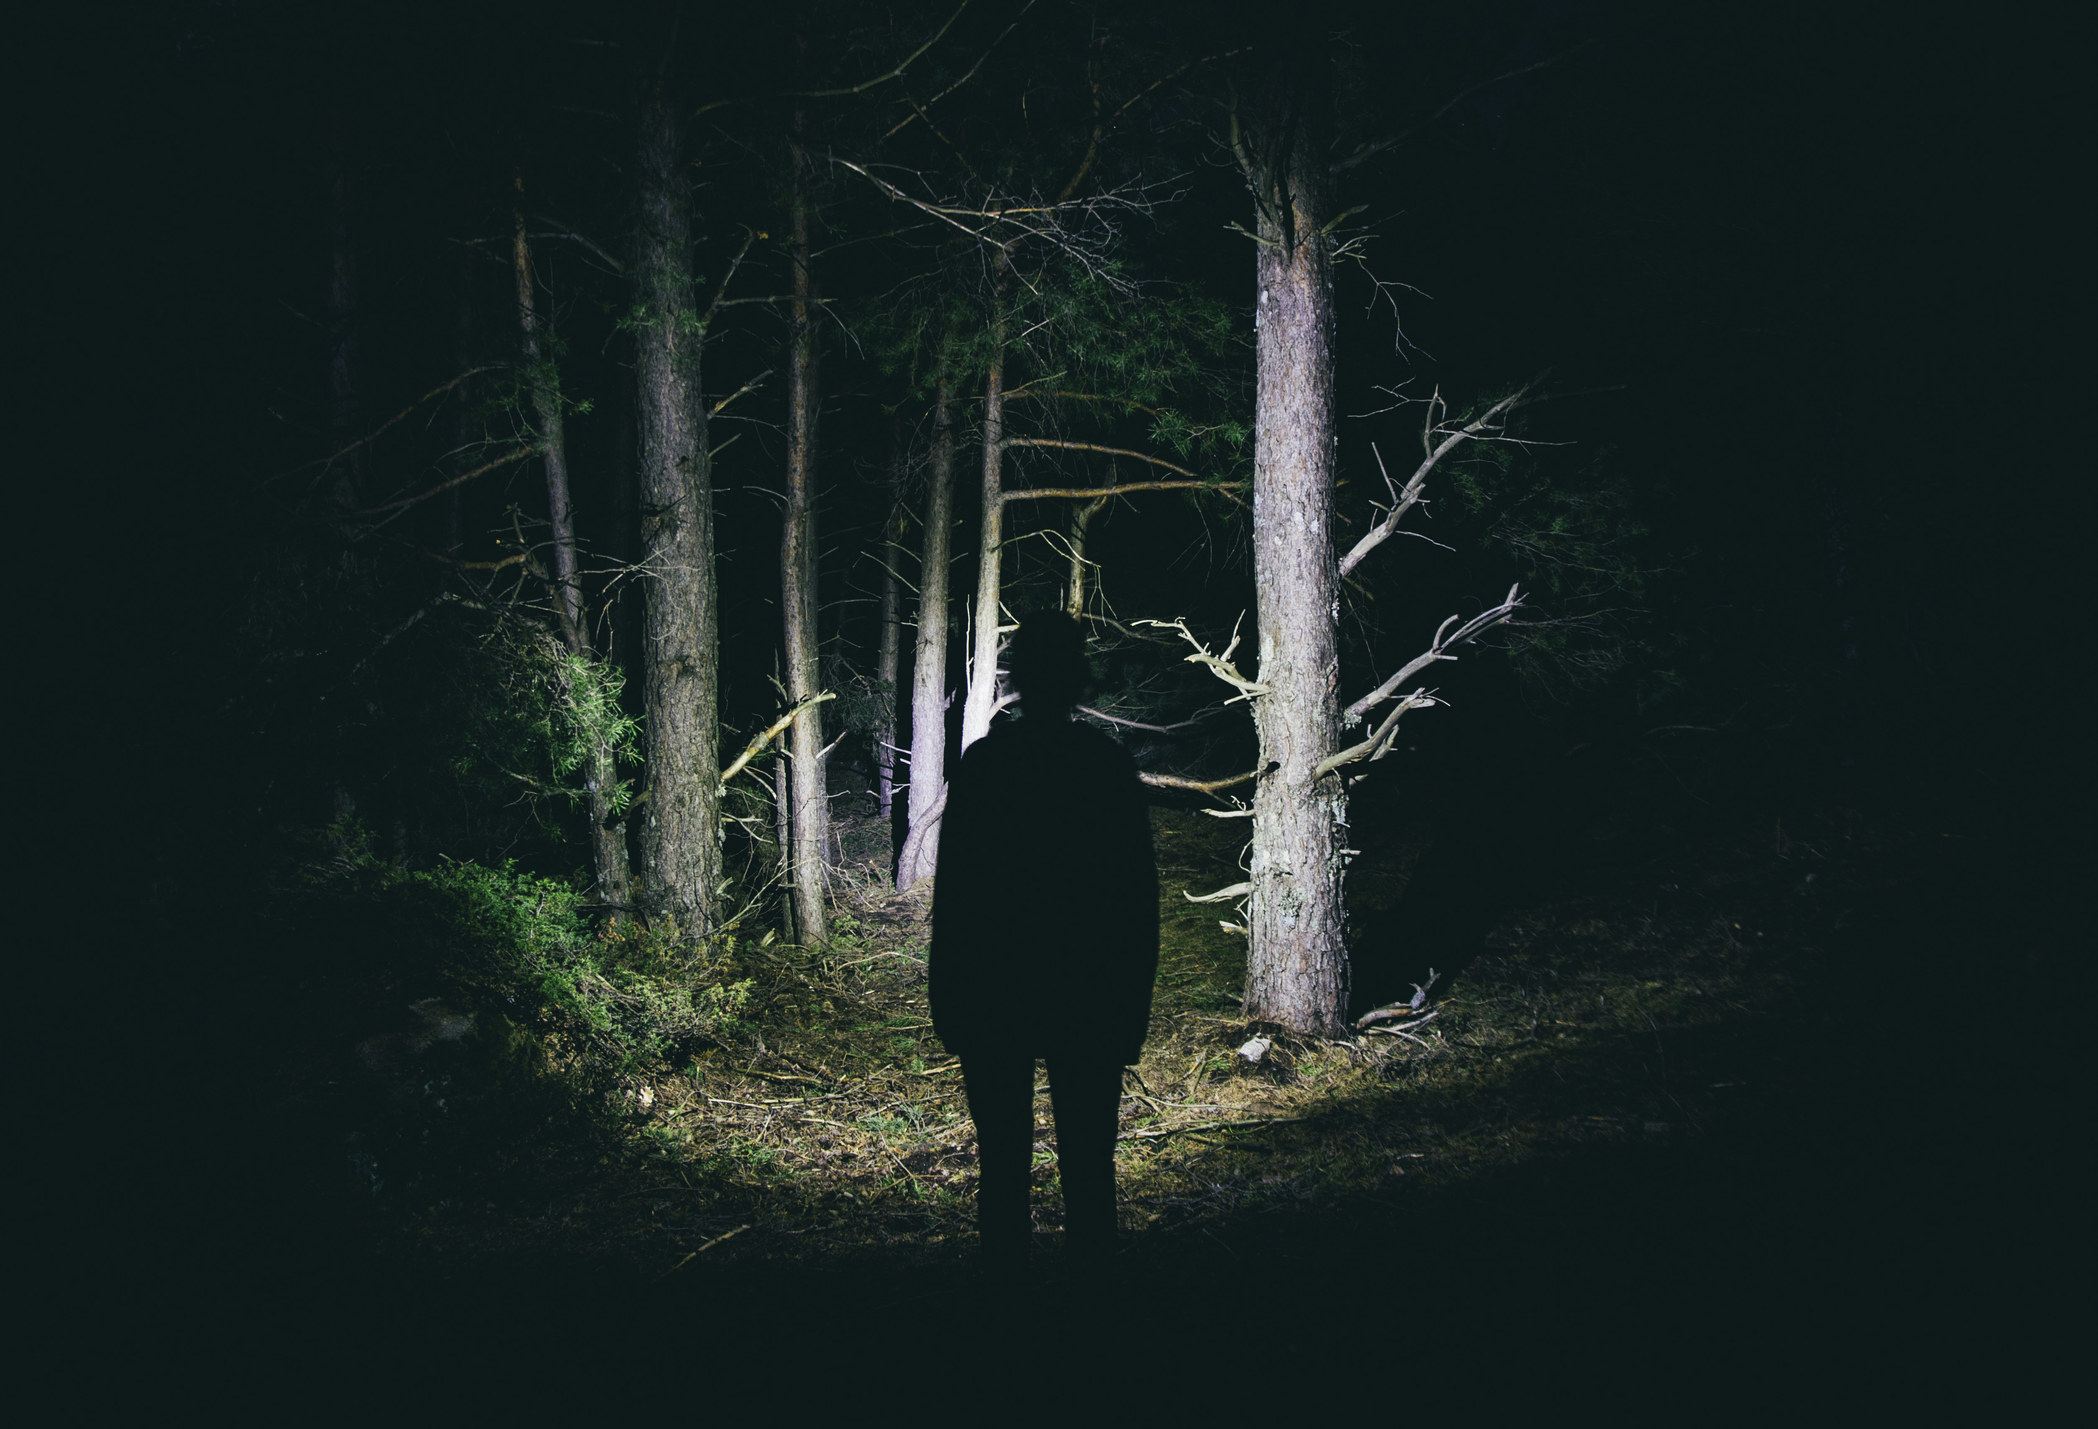 A person standing in the dark forest